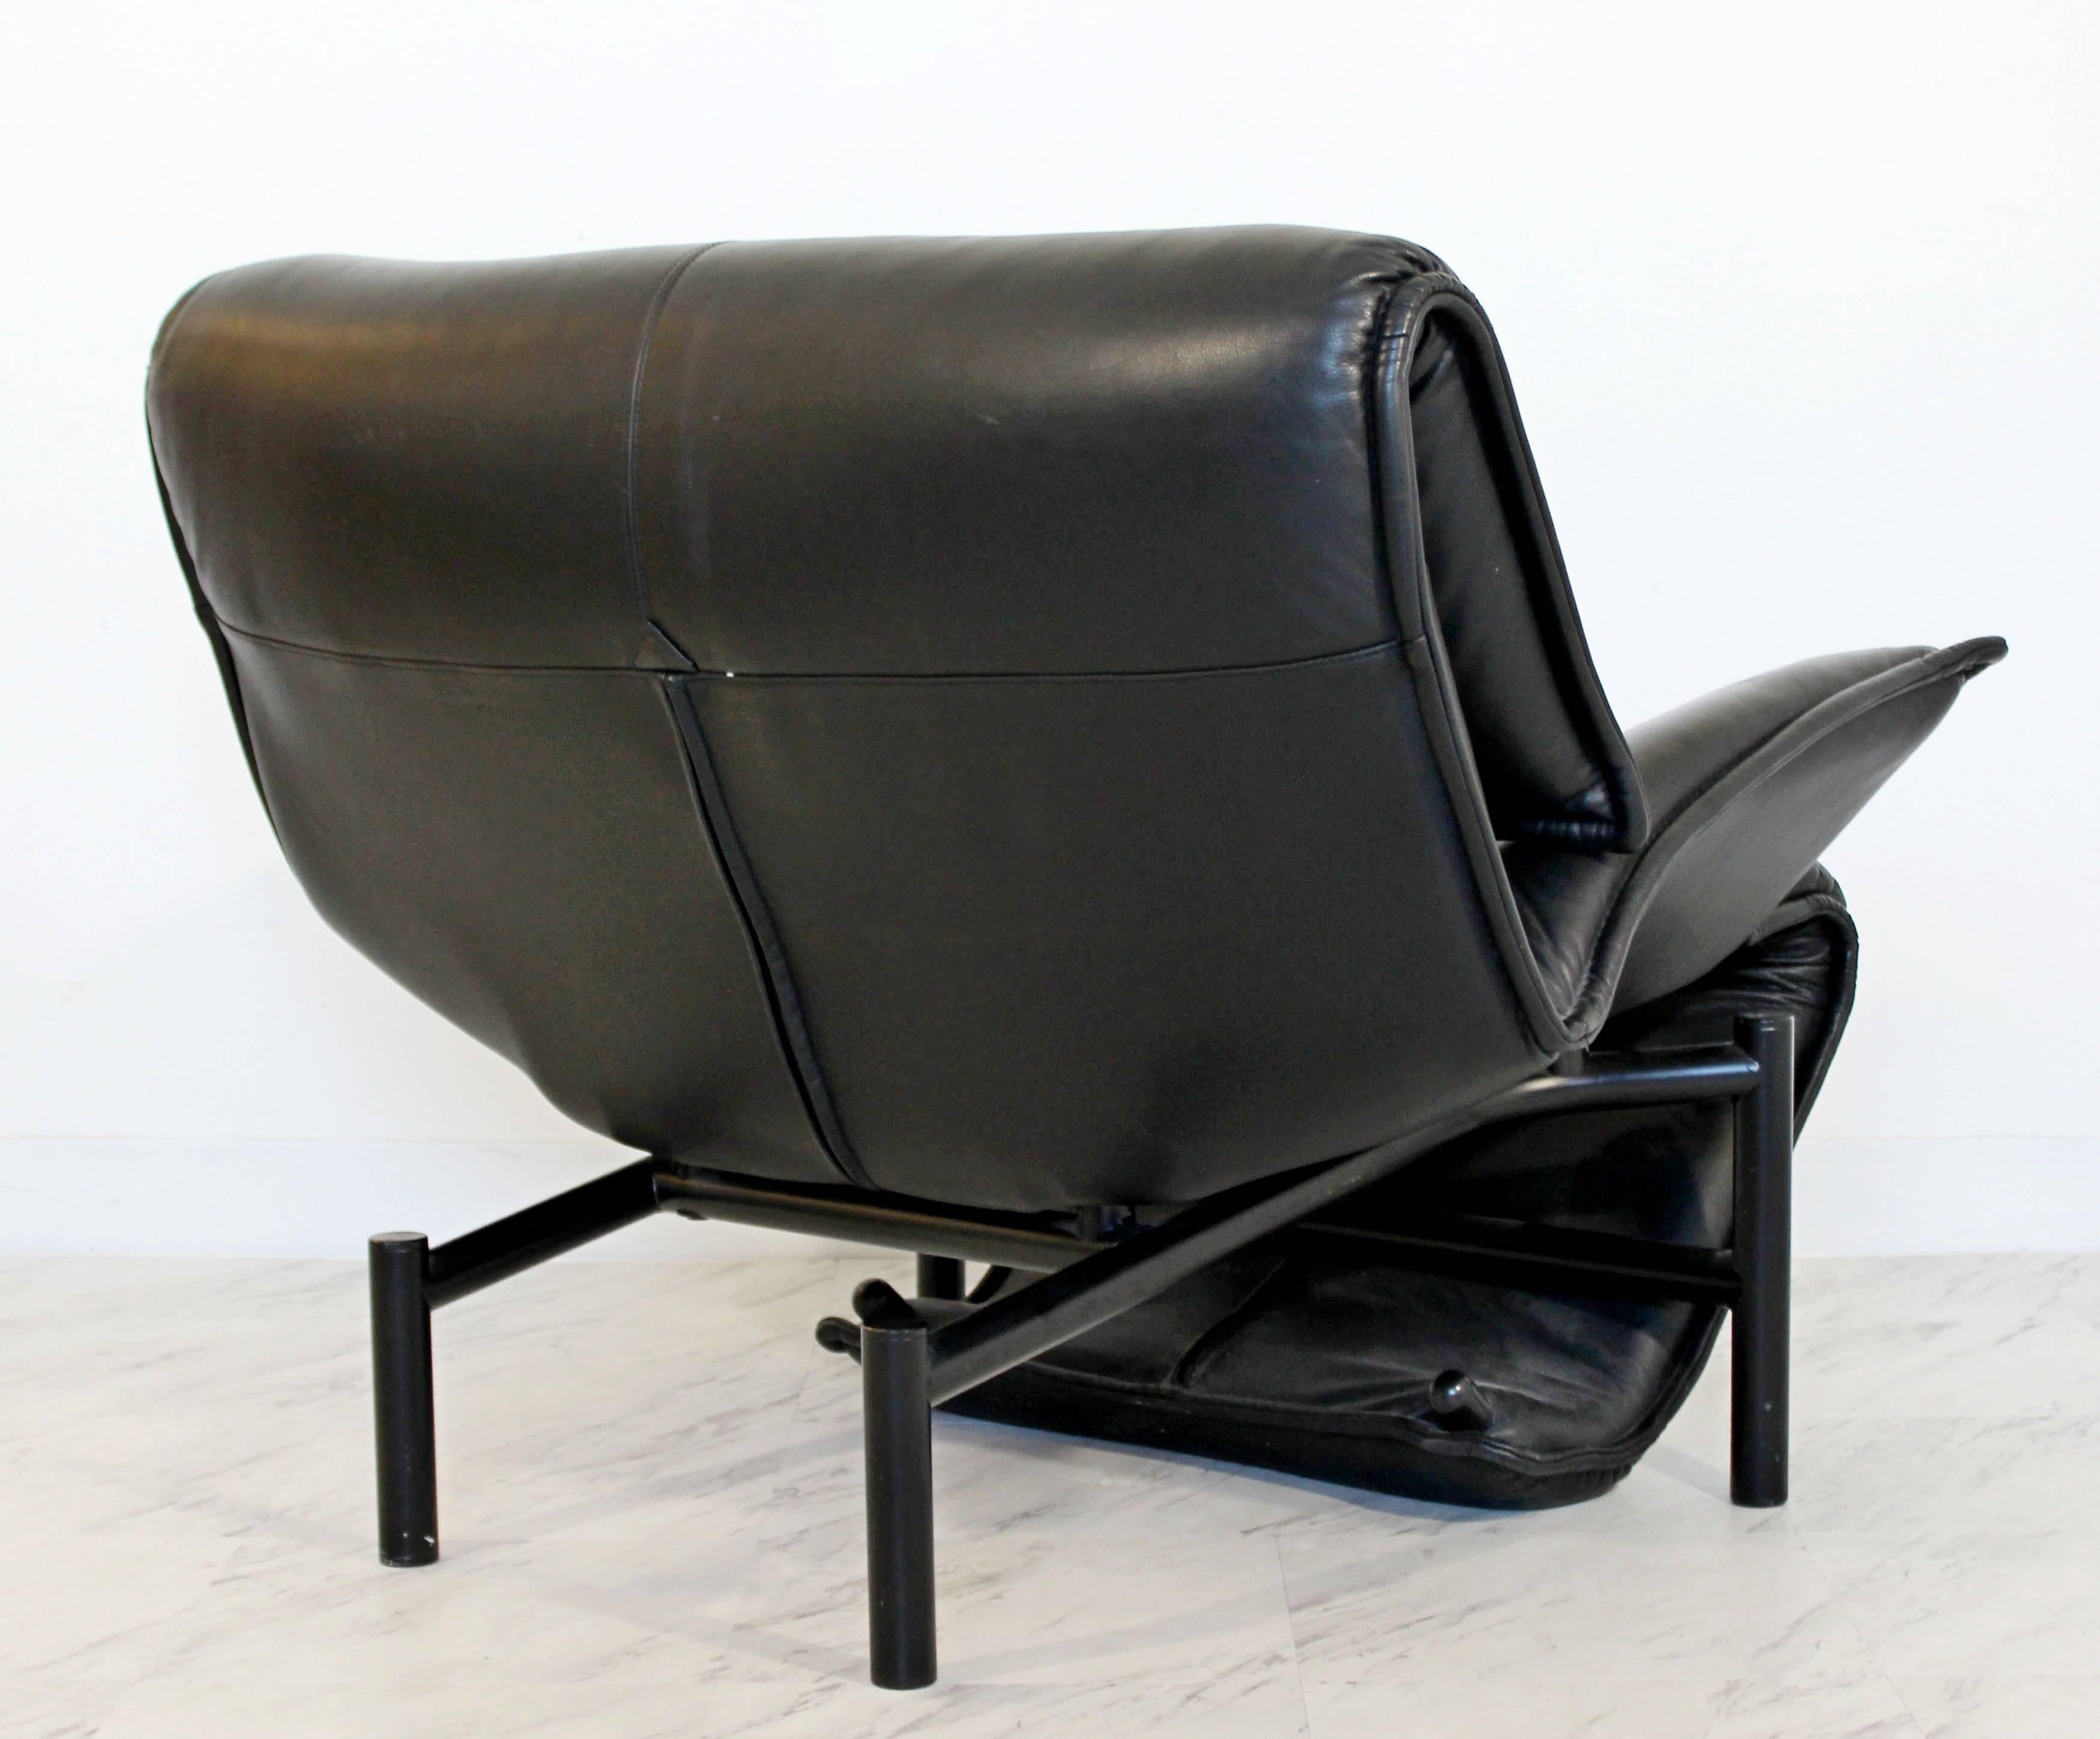 Italian Mid-Century Modern Black Leather Recliner Lounge Chairs Magistretti for Cassina